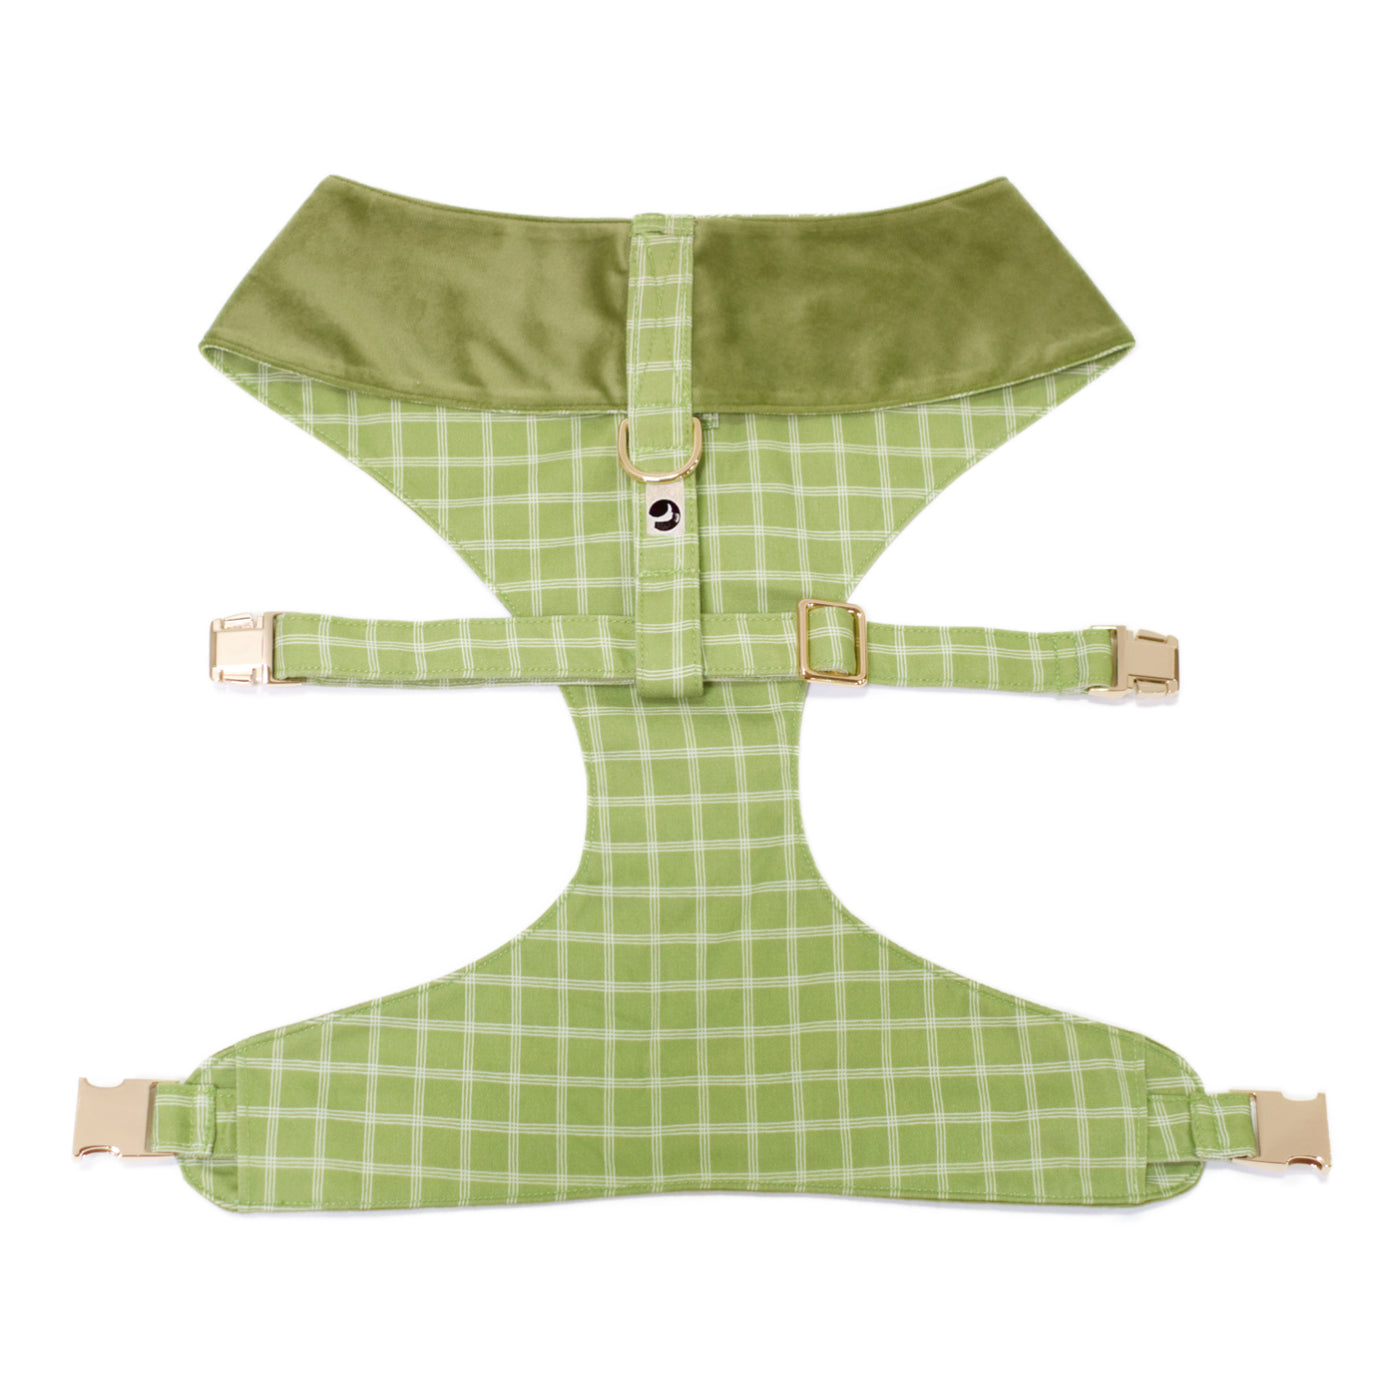 Top/back view of olive green velvet dog harness and spring green plaid reverse